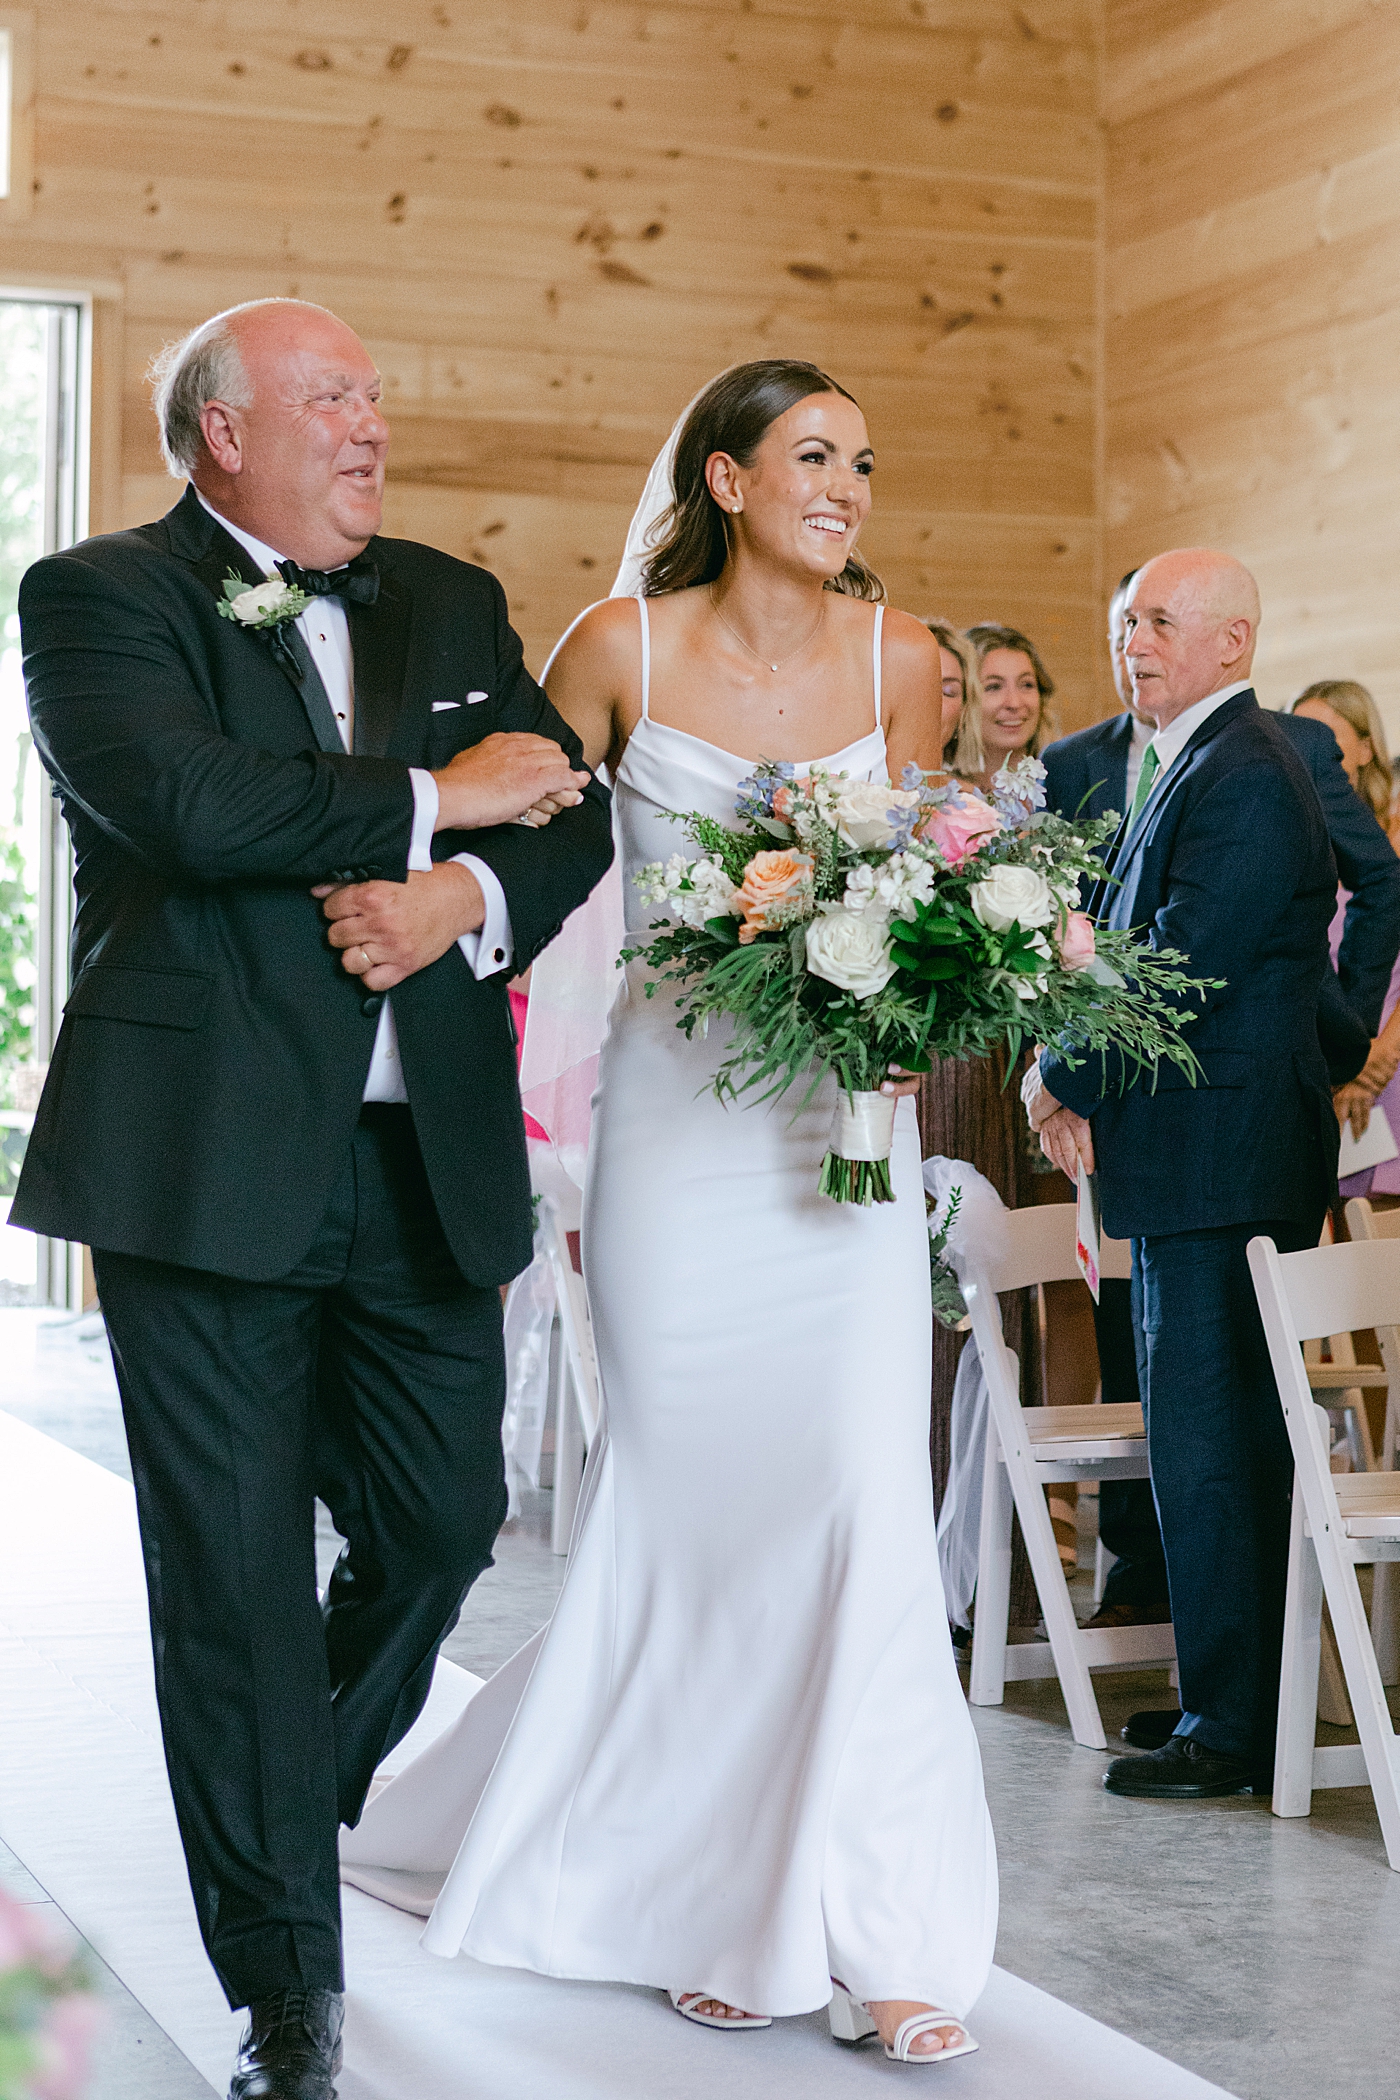 Bride walking down the aisle | Image by Hope Helmuth Photography